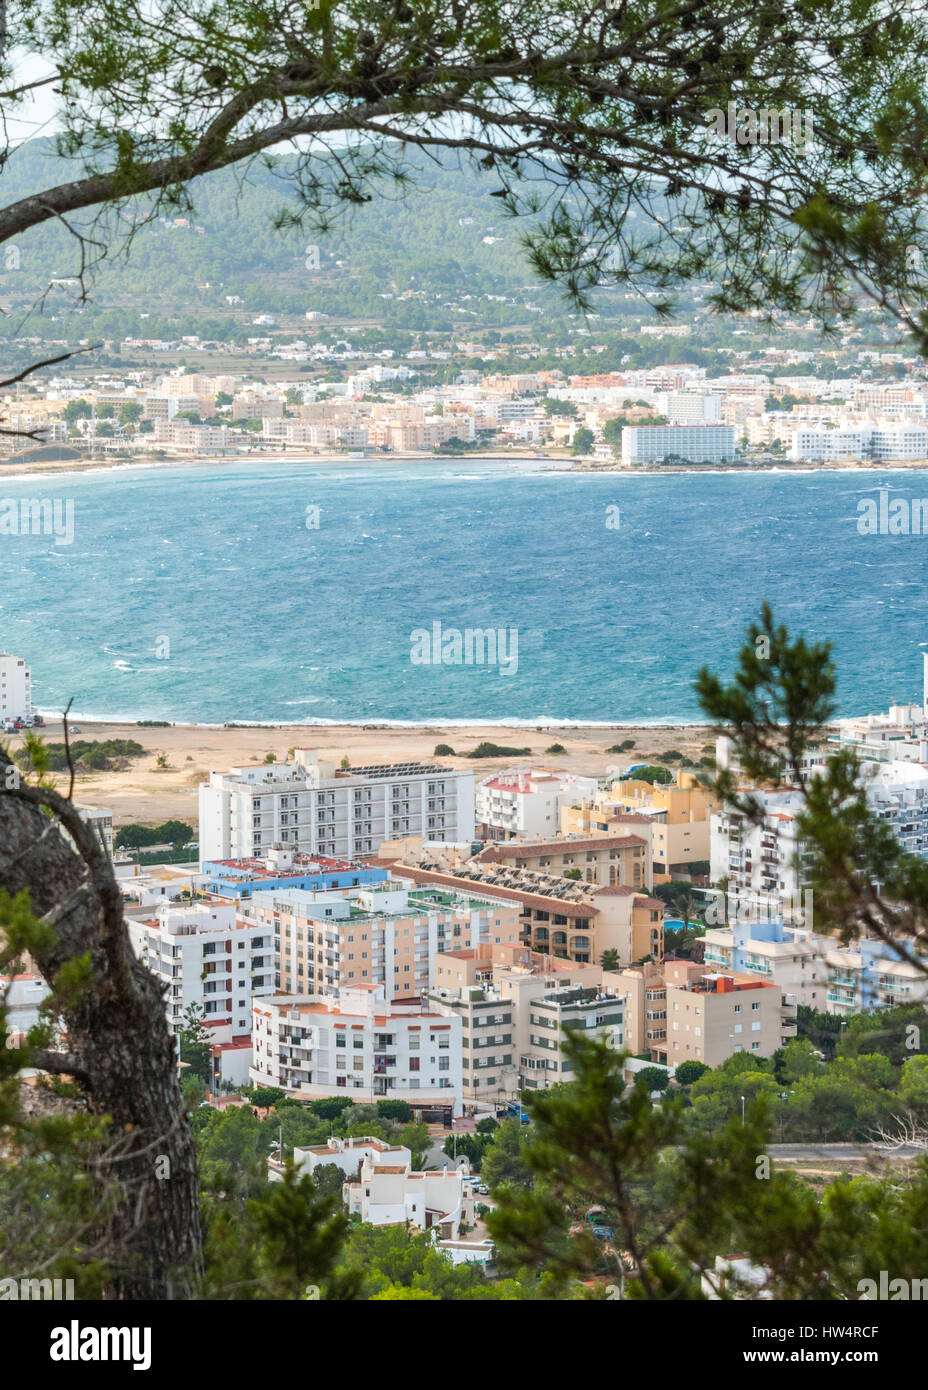 View through naturally framing trees, from hillside of nearby town: San Antonio Sant Antoni de Portmany in the Balearic Islands, Ibiza, Spain. Stock Photo